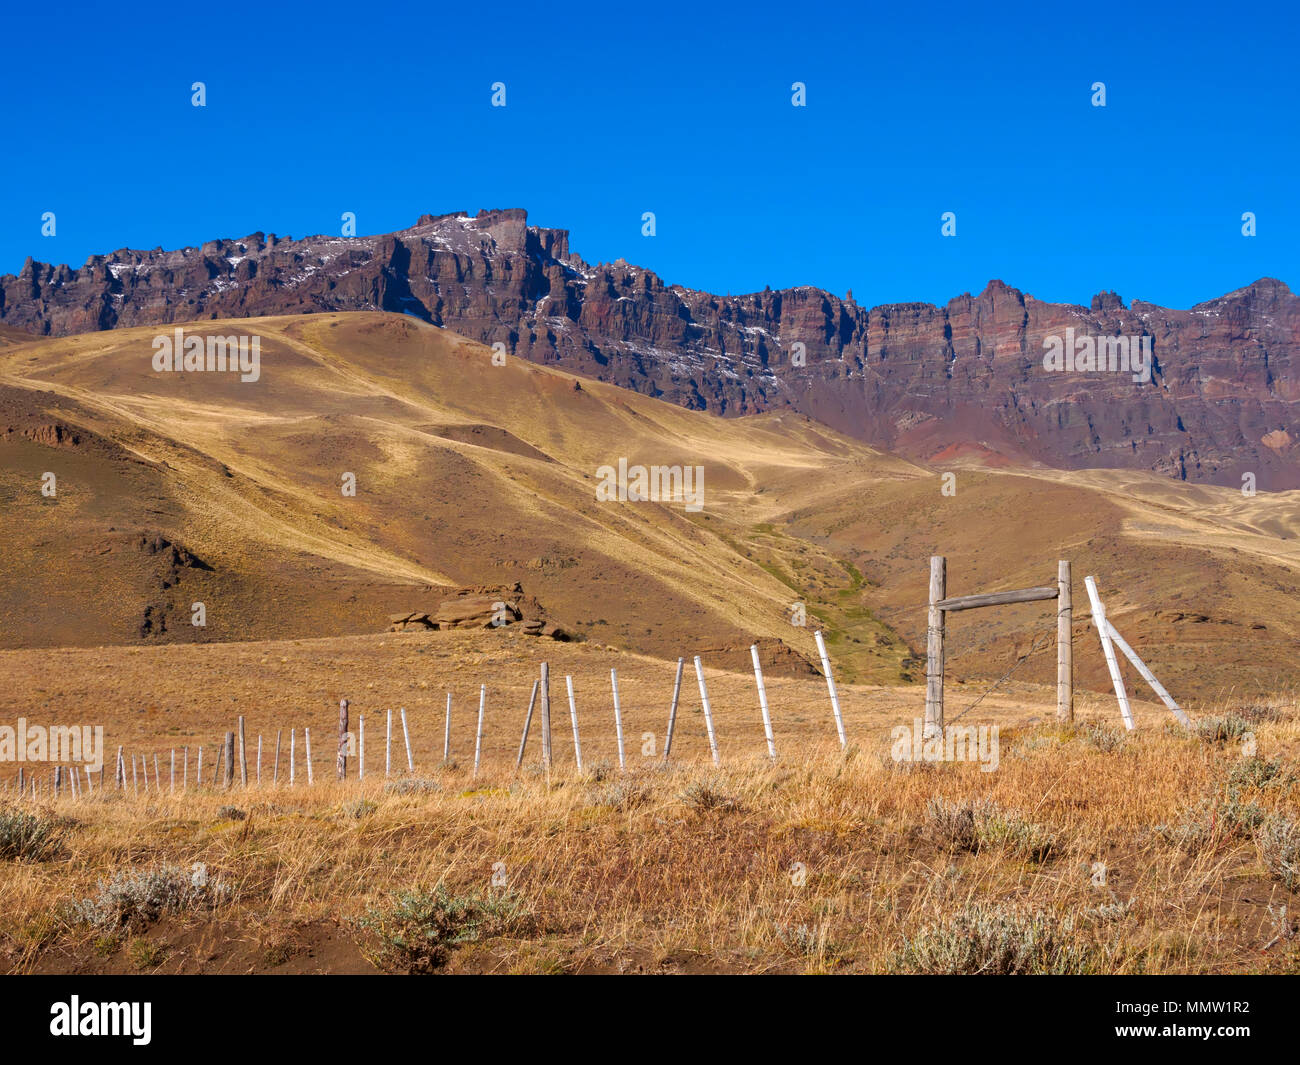 Estancia Baguales and Sierra Baguales, Patagonia, Chile. The remote ranch is located in the valley of Rio Baguales, near the border with Argentina. Stock Photo